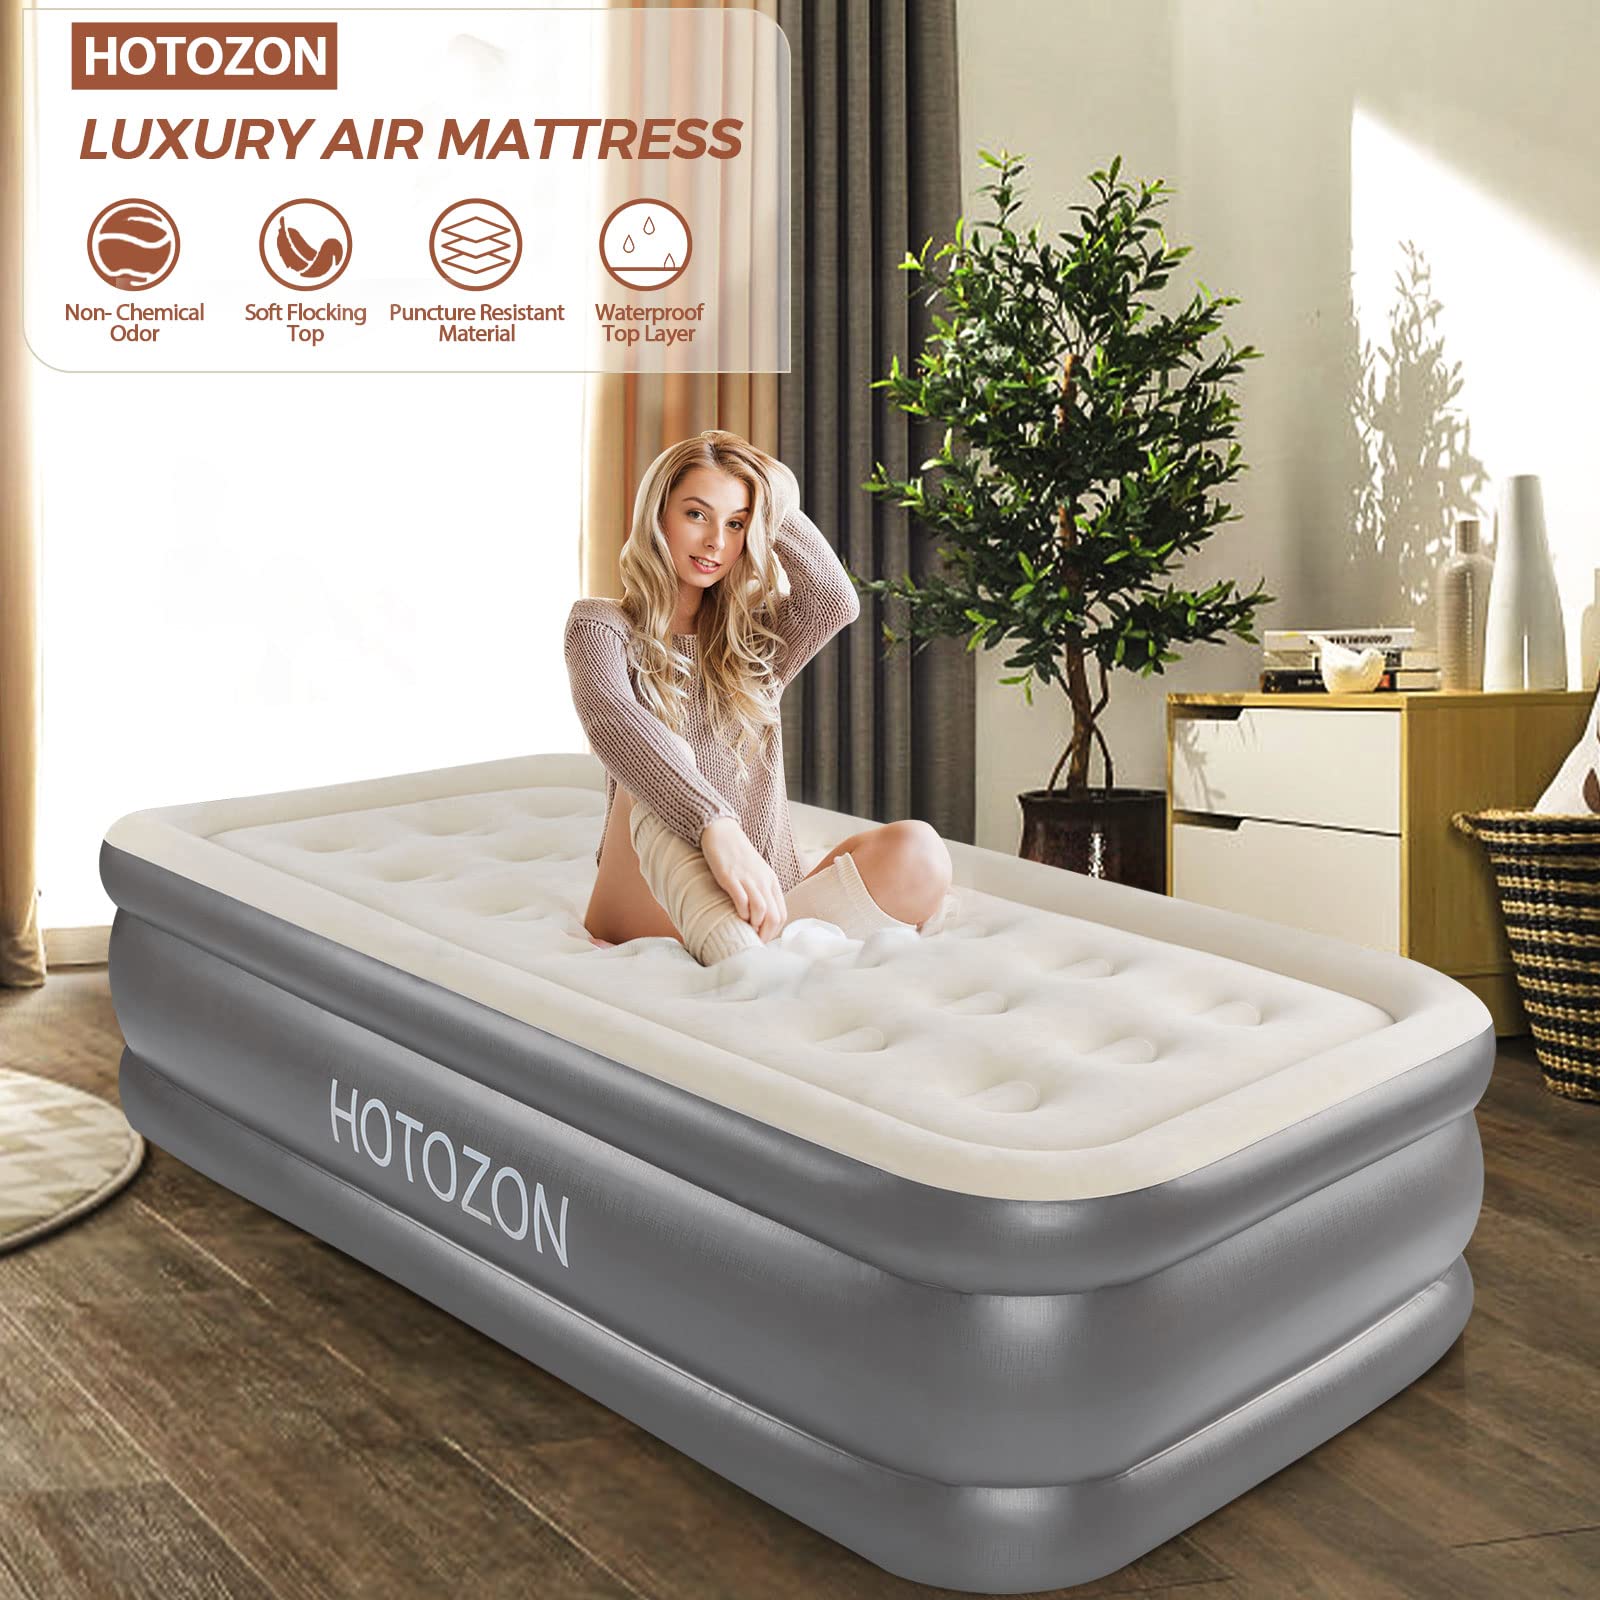 HOTOZON Twin Air Mattress with Built-in Pump, 18" Foldable Air Bed with Carry Bag, Luxury Elevated Inflatable Air Mattresses, Blow Up Airbed for Home, Camping & Guests, Grey